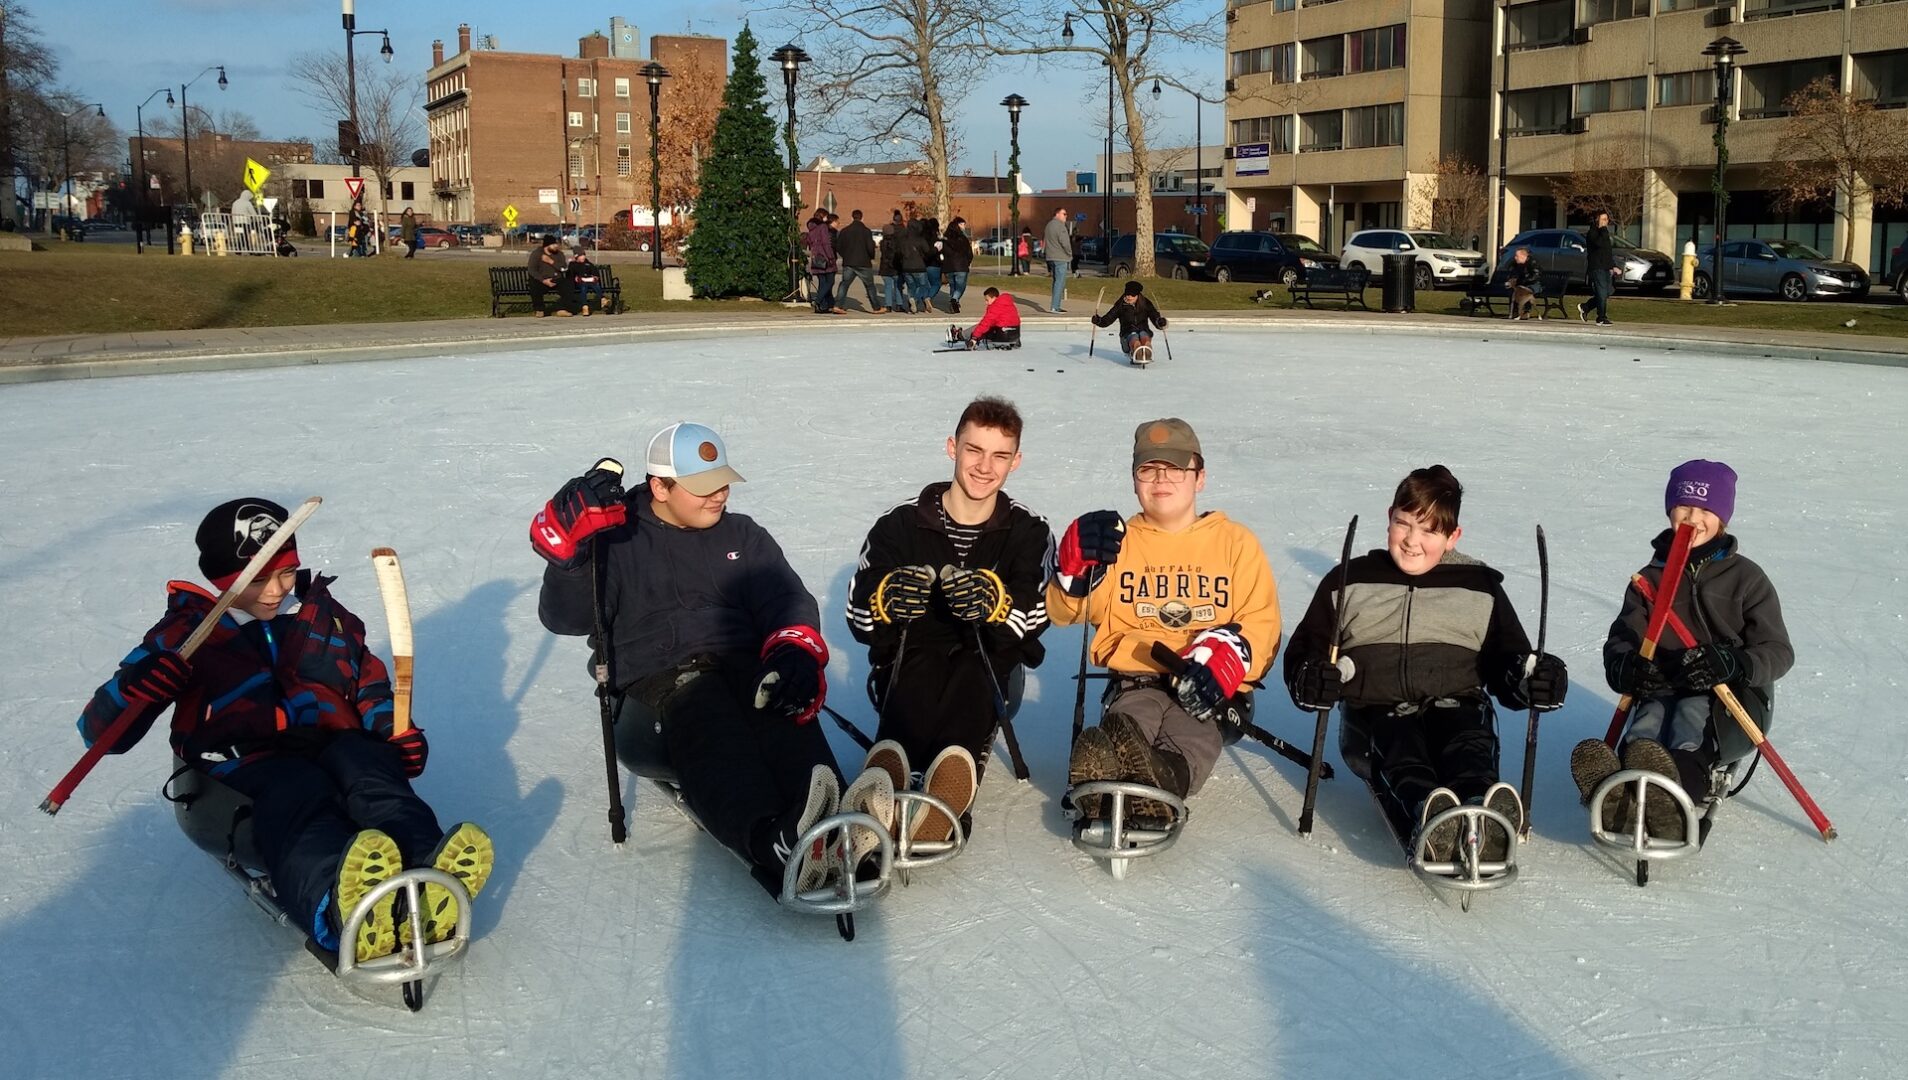 A group of six people in hockey sleds on an outdoor ice rink